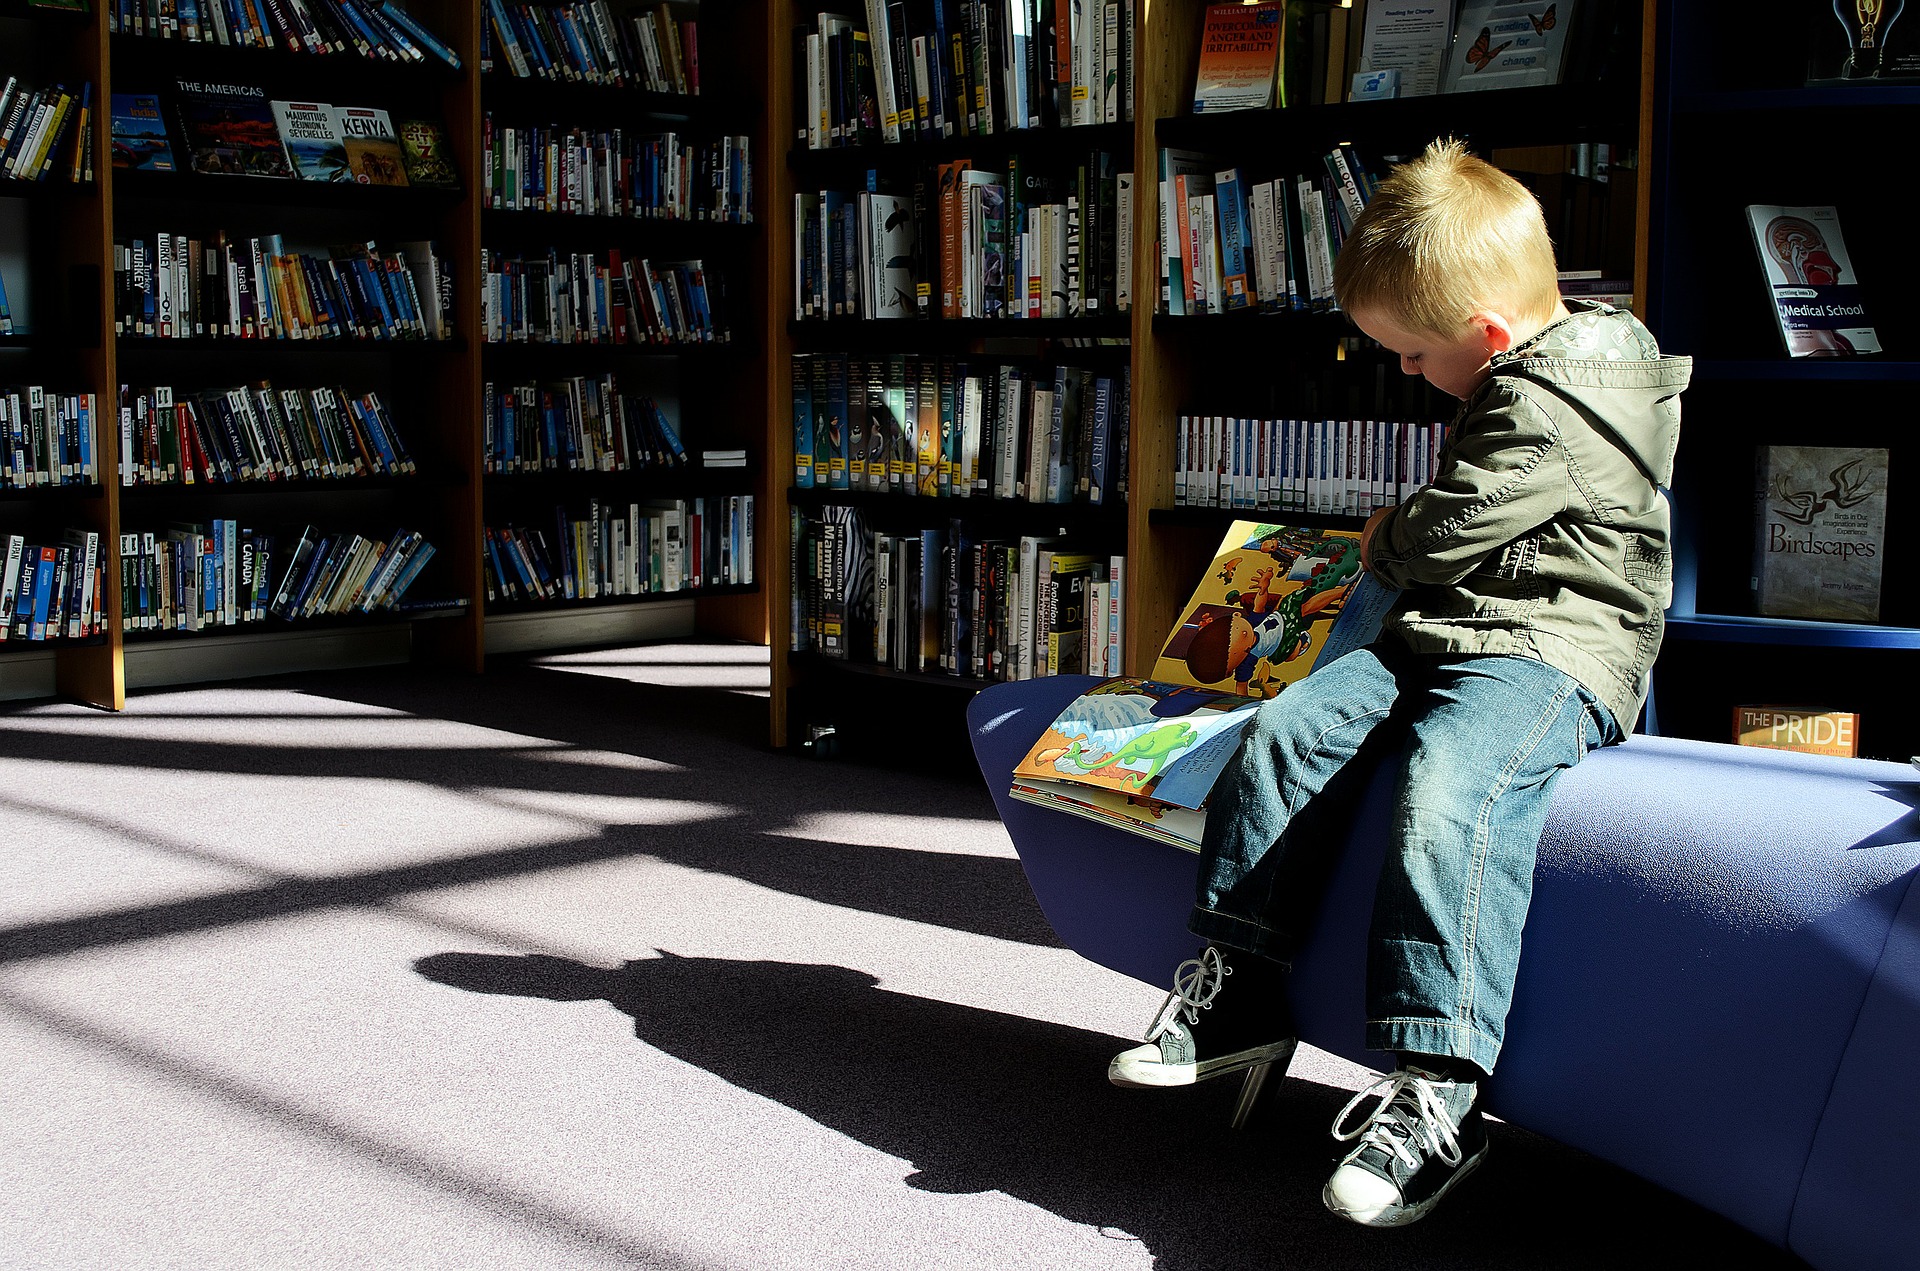 A boy reads a book in a library